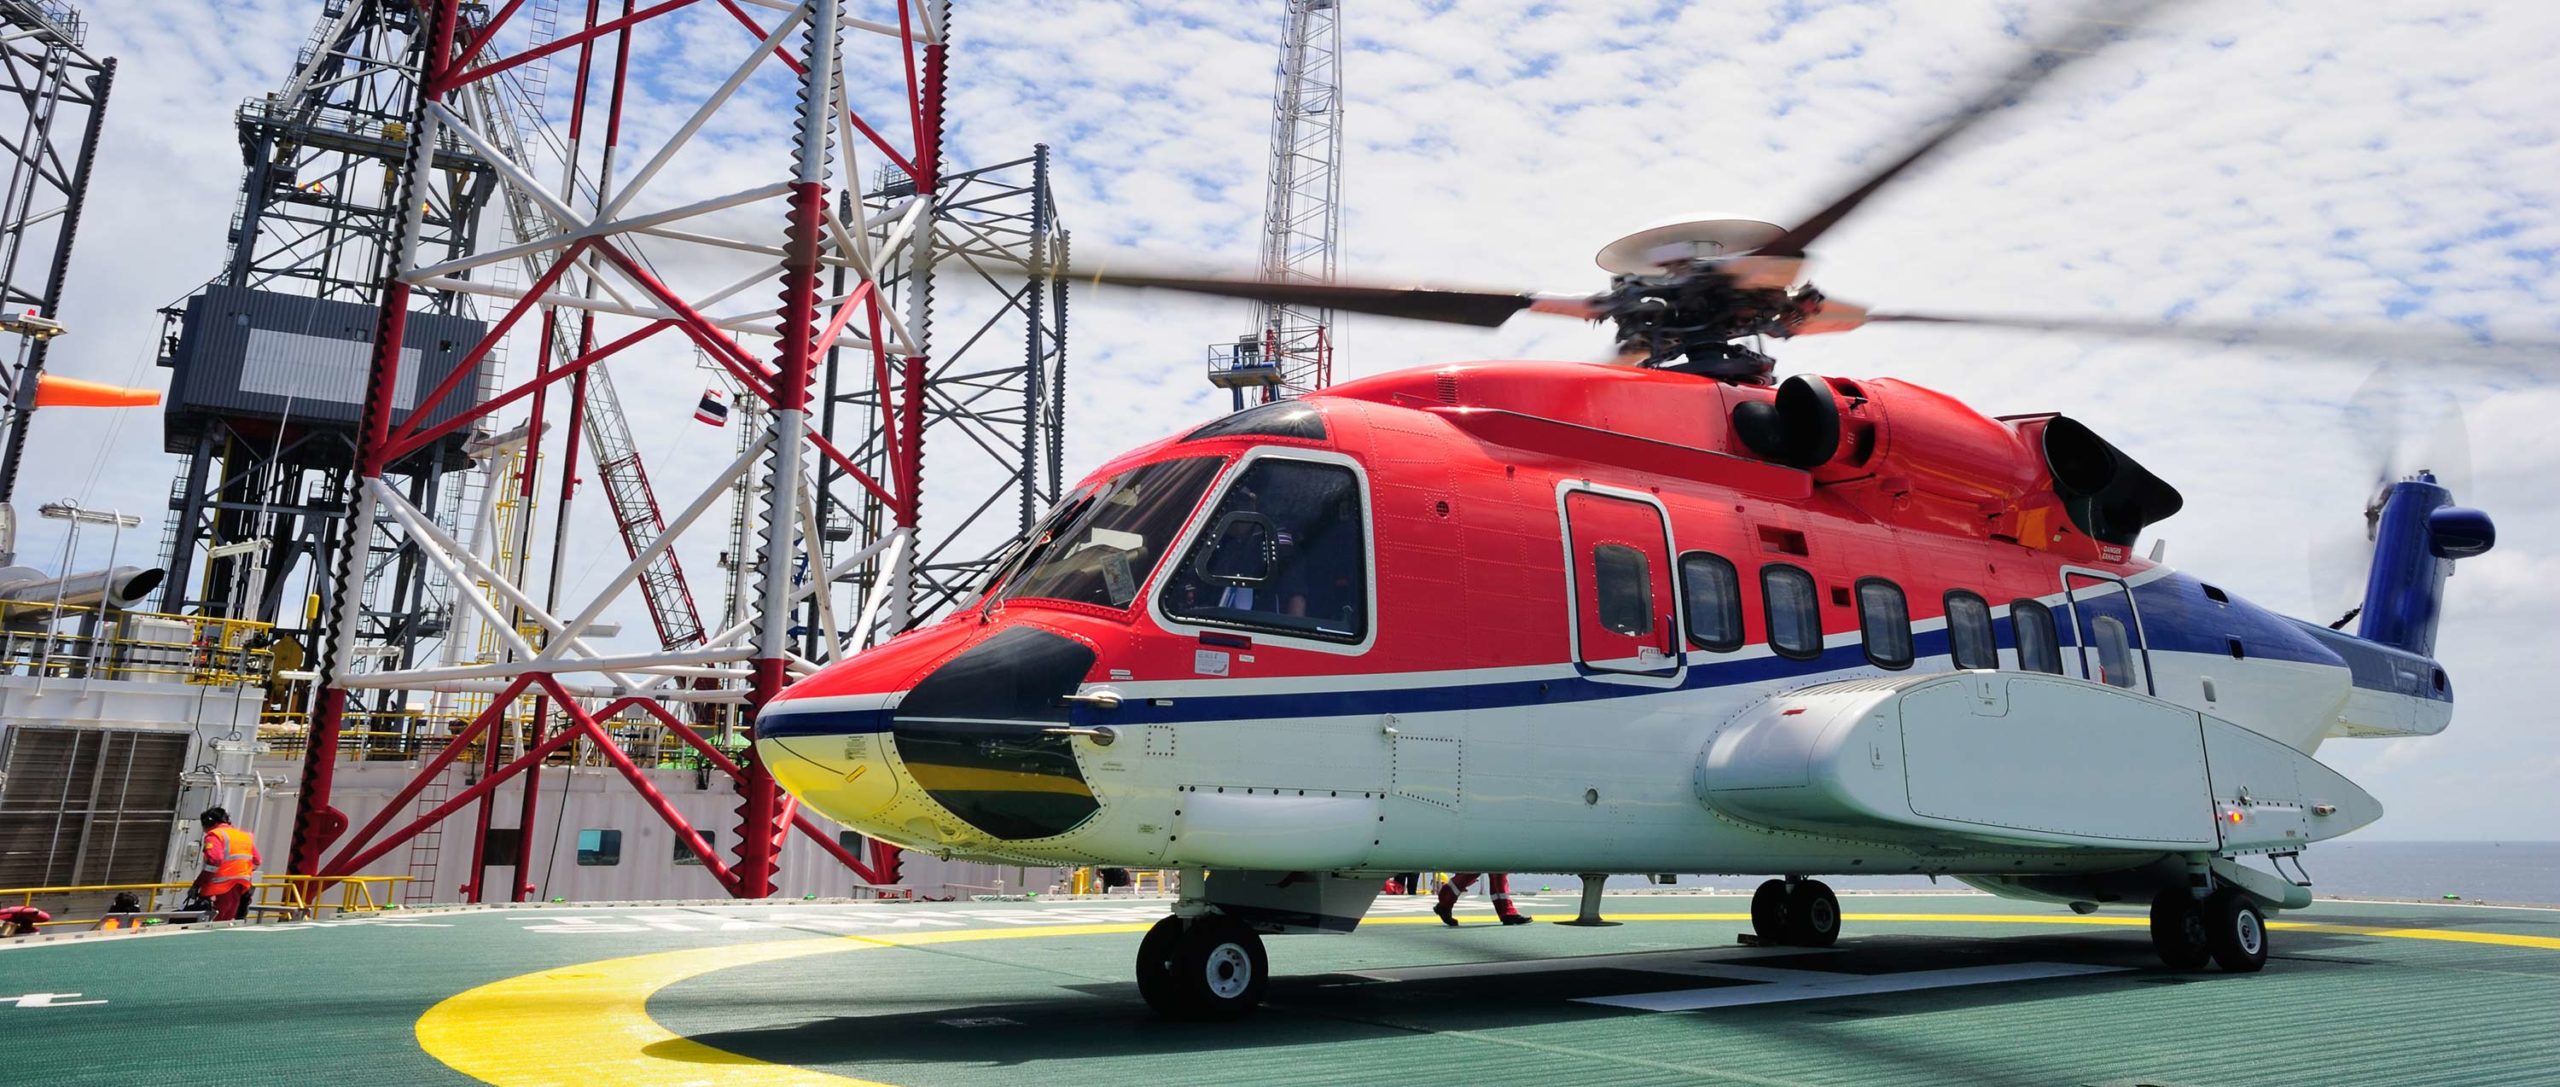 New utilisation figures reveal S-92 helicopters are ahead of the curve